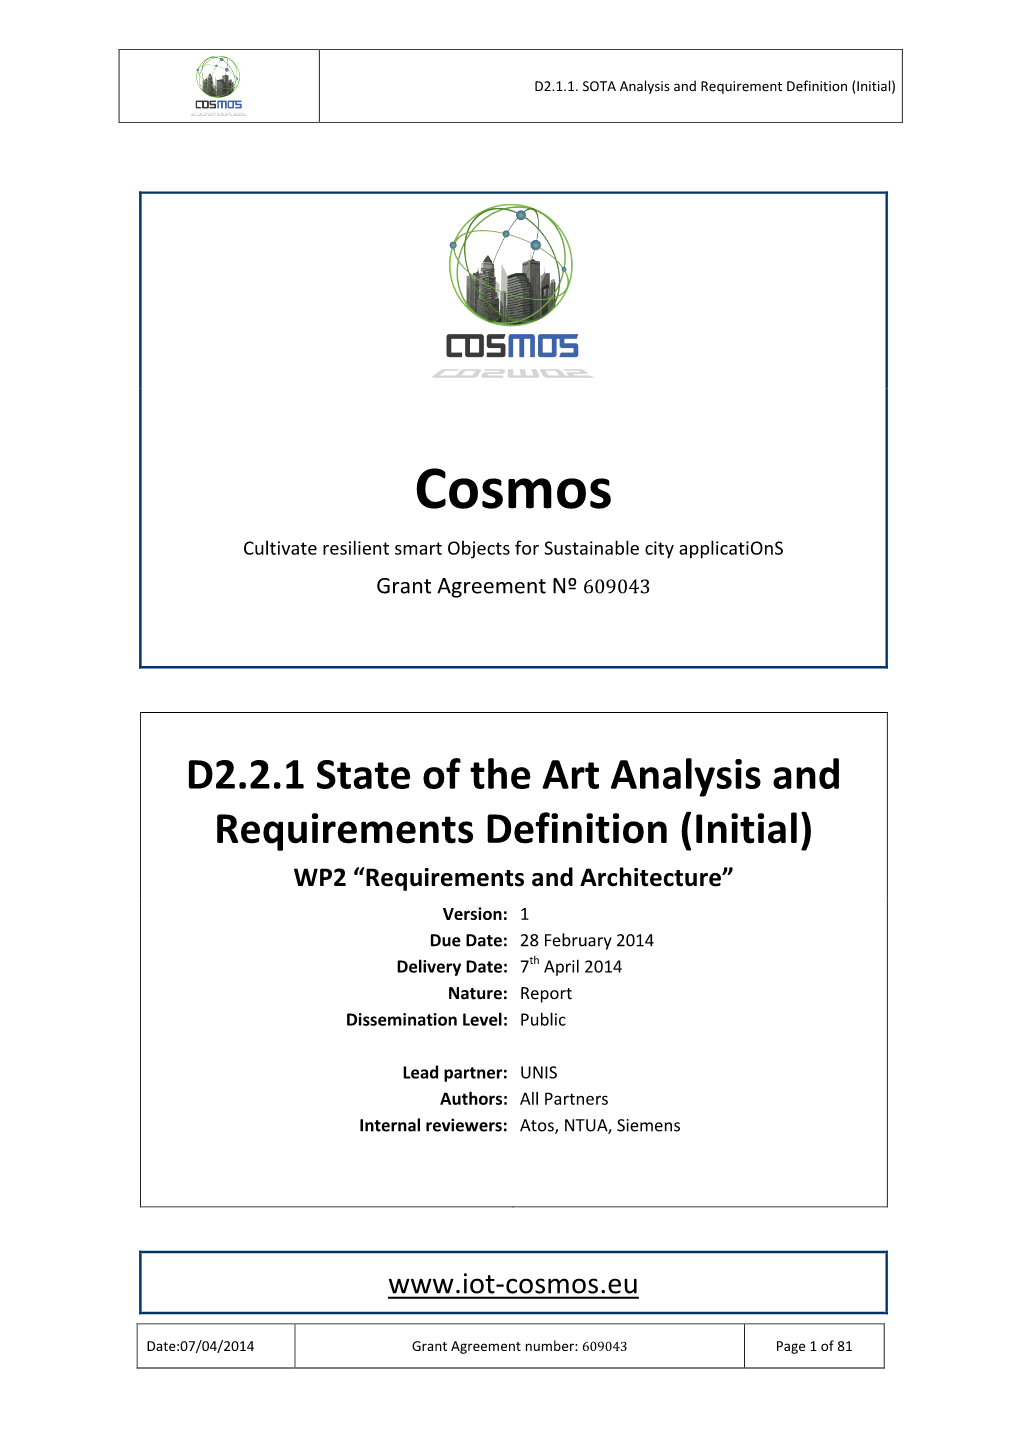 D2.2.1 State of the Art Analysis and Requirements